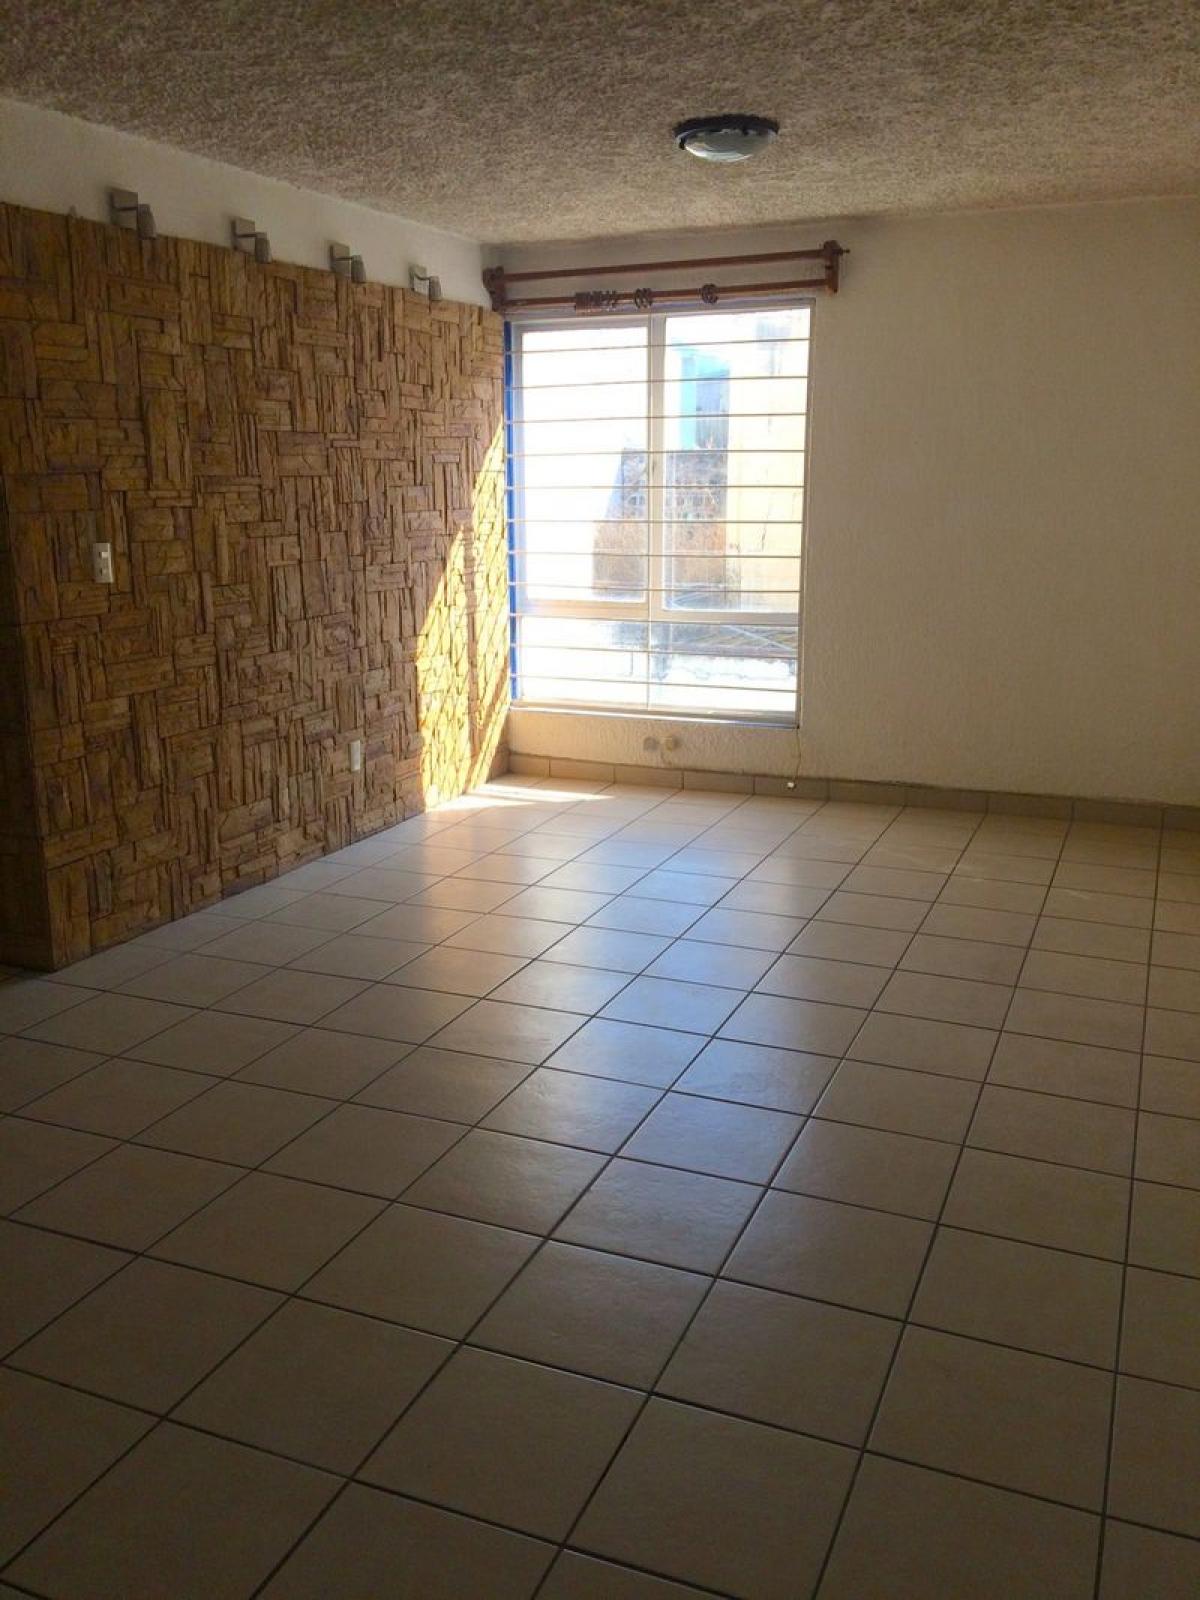 Picture of Apartment For Sale in San Pedro Tlaquepaque, Jalisco, Mexico